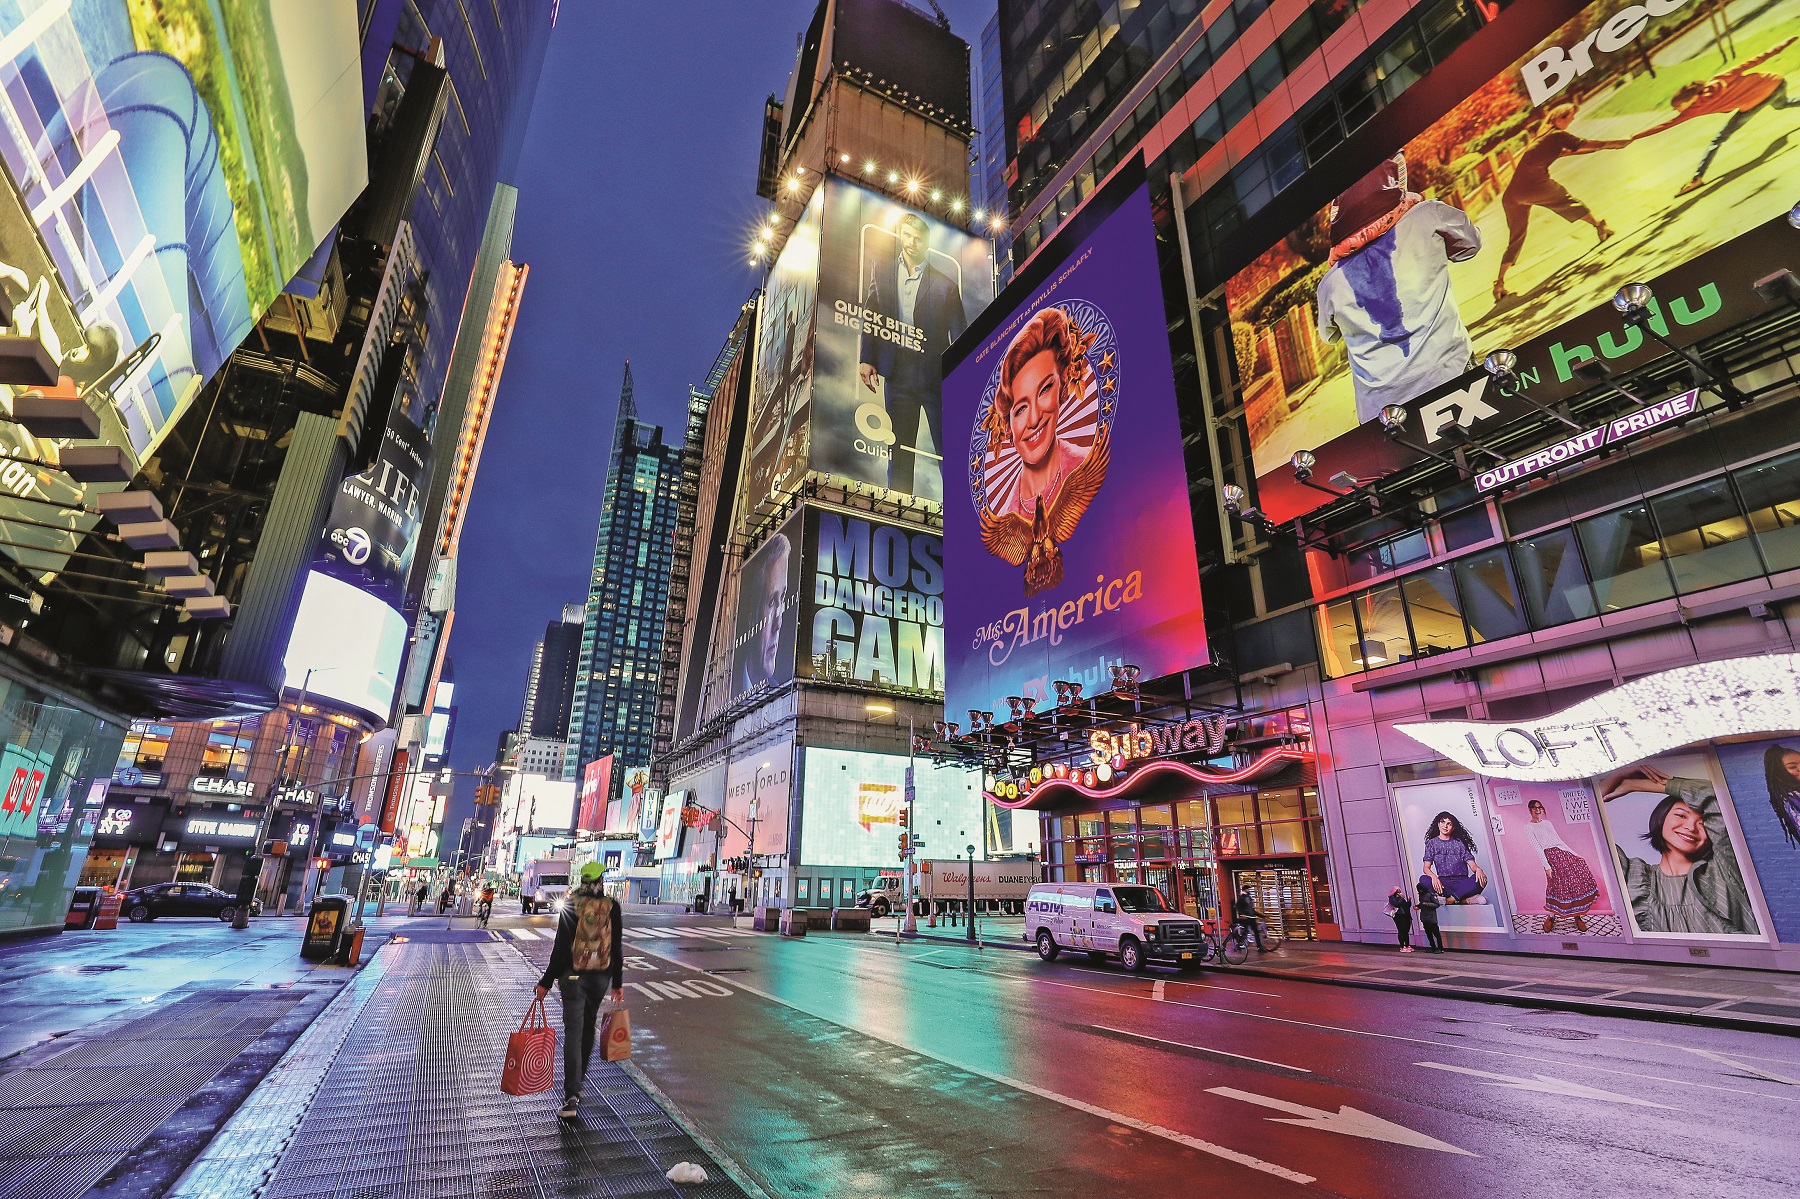 NEW YORK, NEW YORK - APRIL 24: Times Square is seen almost empty on April 24, 2020 in New York City. Streets continue to stay empty as the virus remains a threat. (Photo by Arturo Holmes/Getty Images)